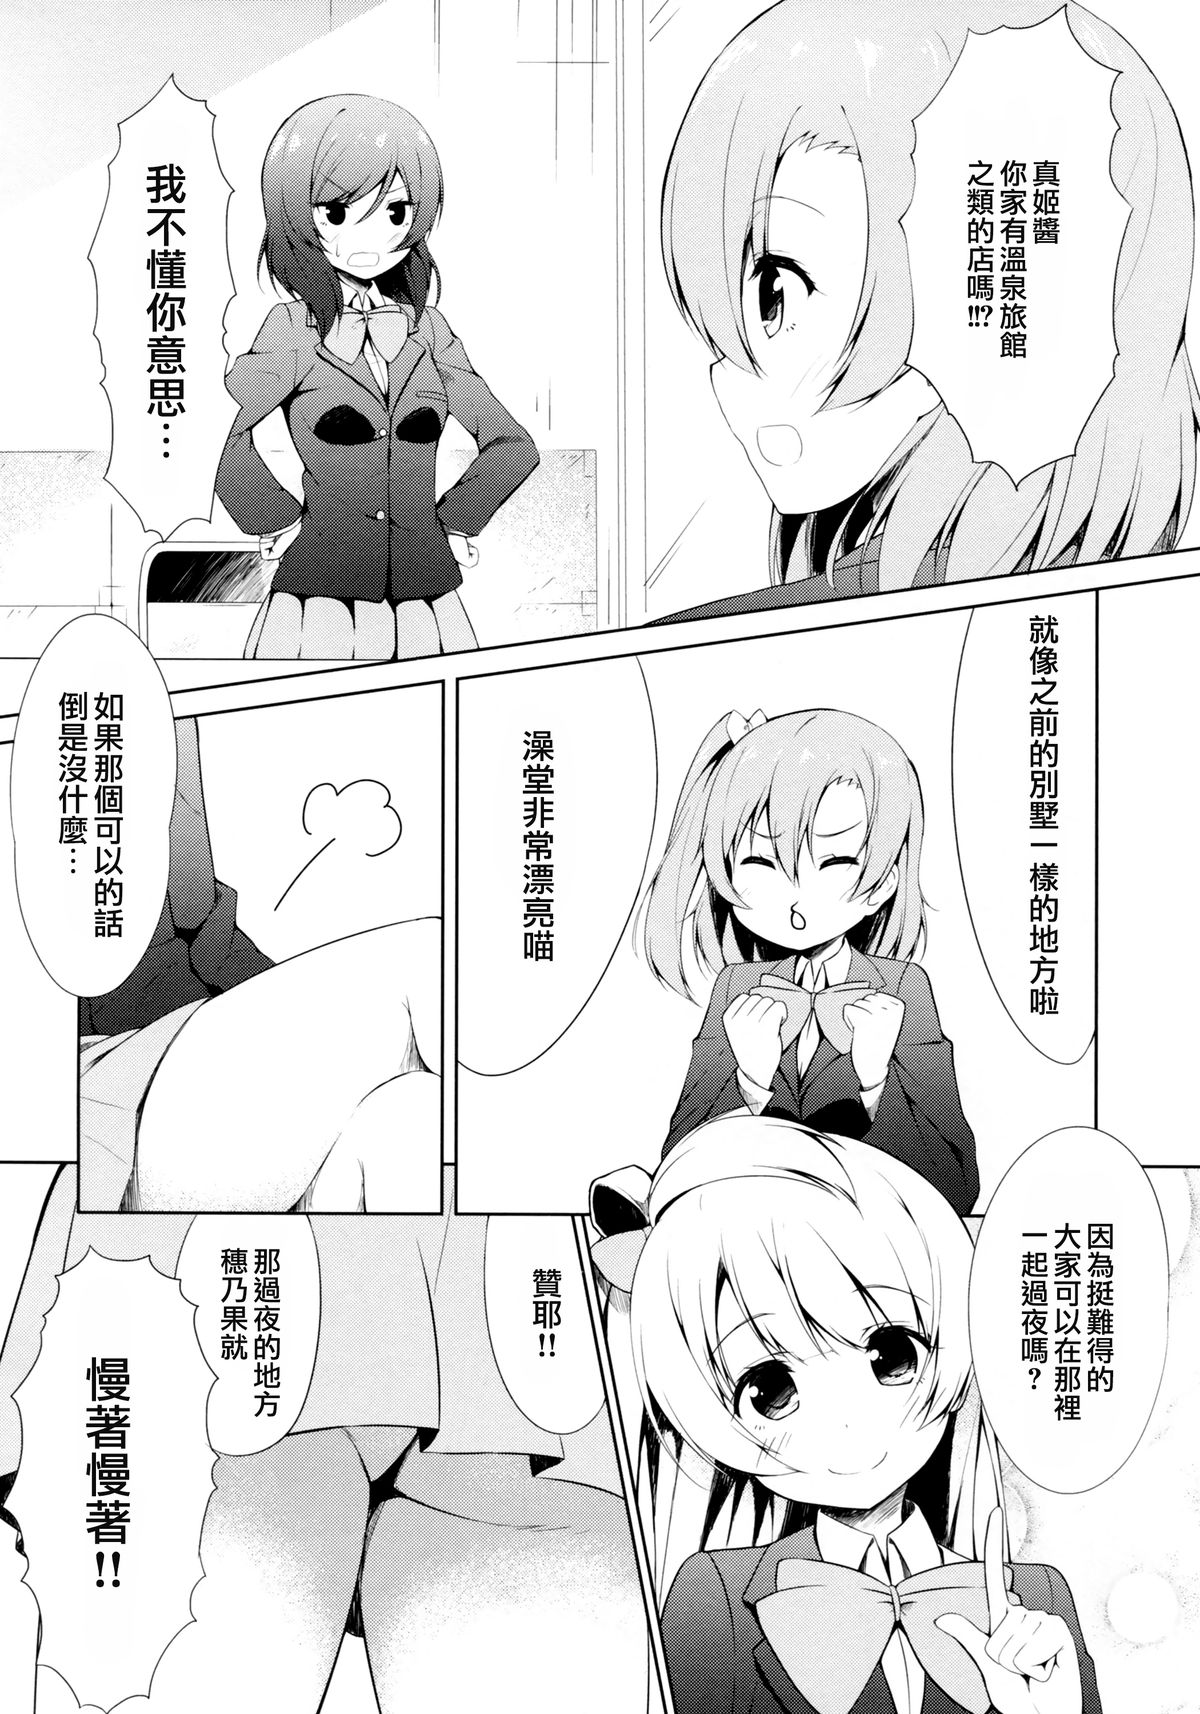 (C87) [EXECUTOR (Siva.)] Mogyutto bath de Sekkinchuu (Love Live!) [Chinese] [光年漢化組] page 6 full